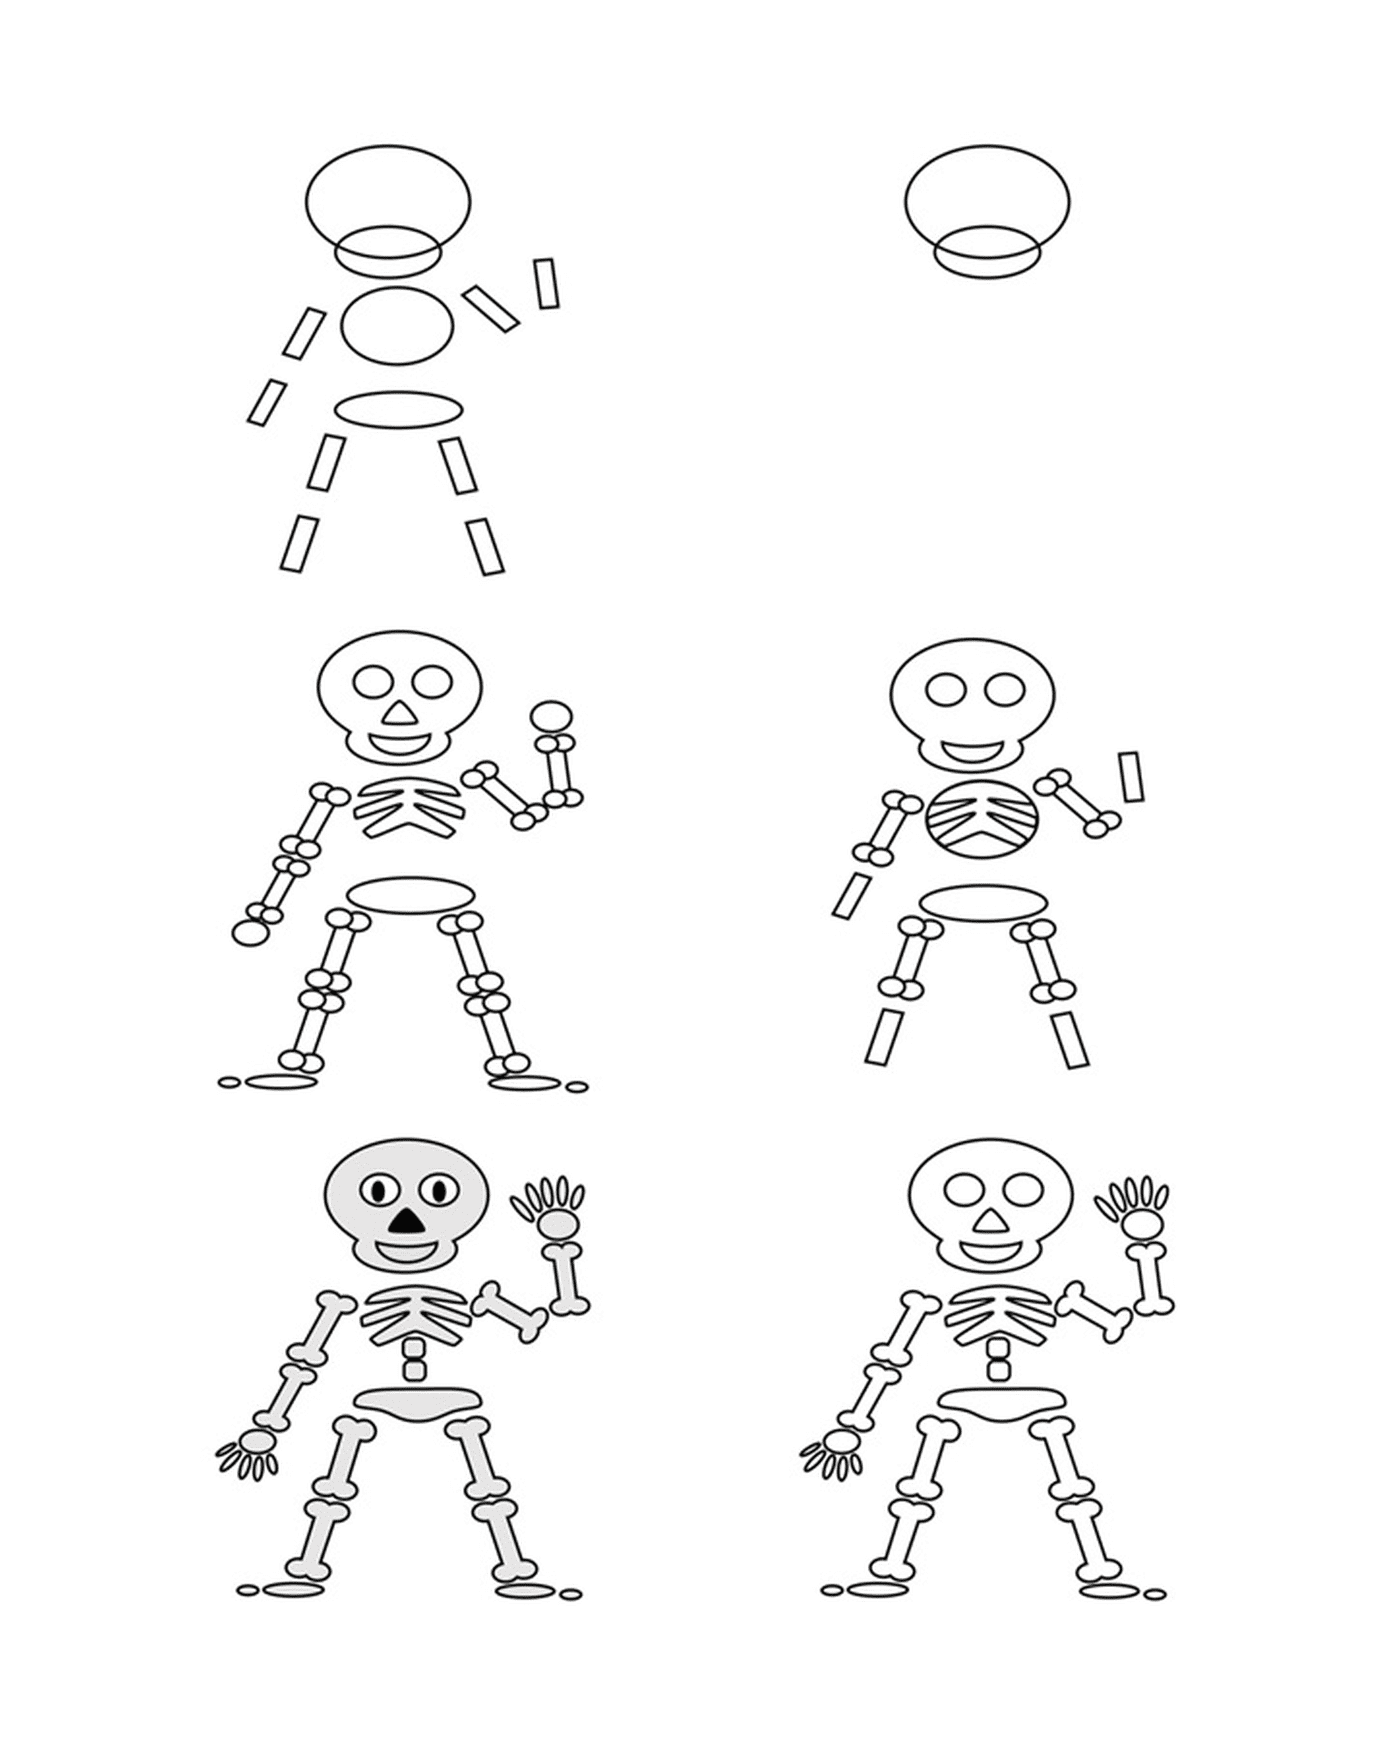  How to draw a skeleton 